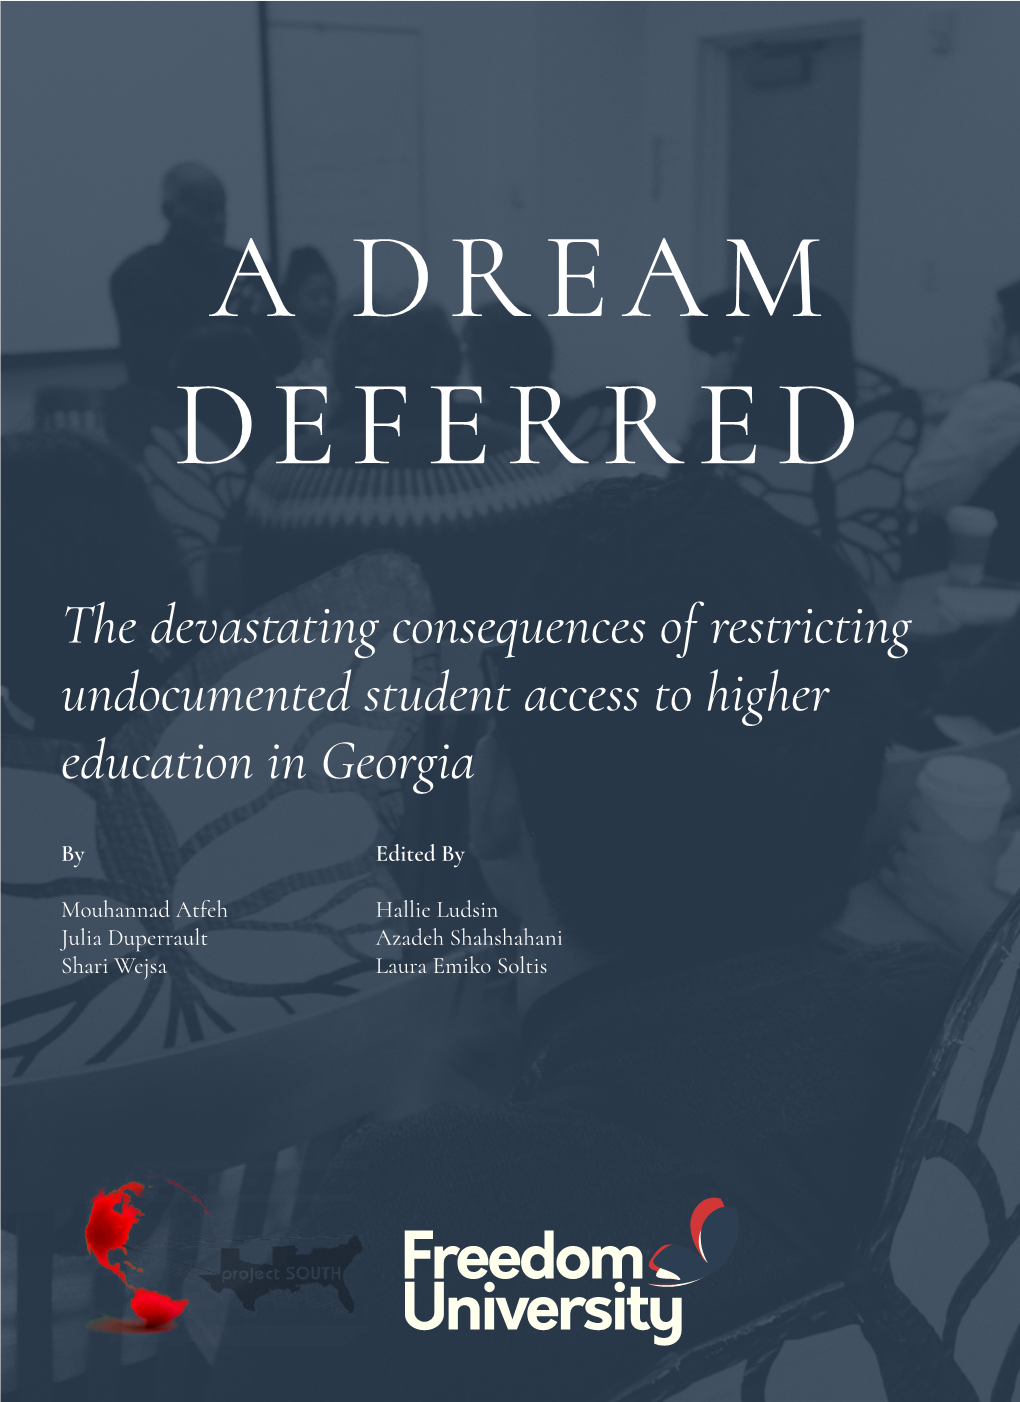 A DREAM DEFERRED the Devastating Consequences of Restricting Undocumented Student